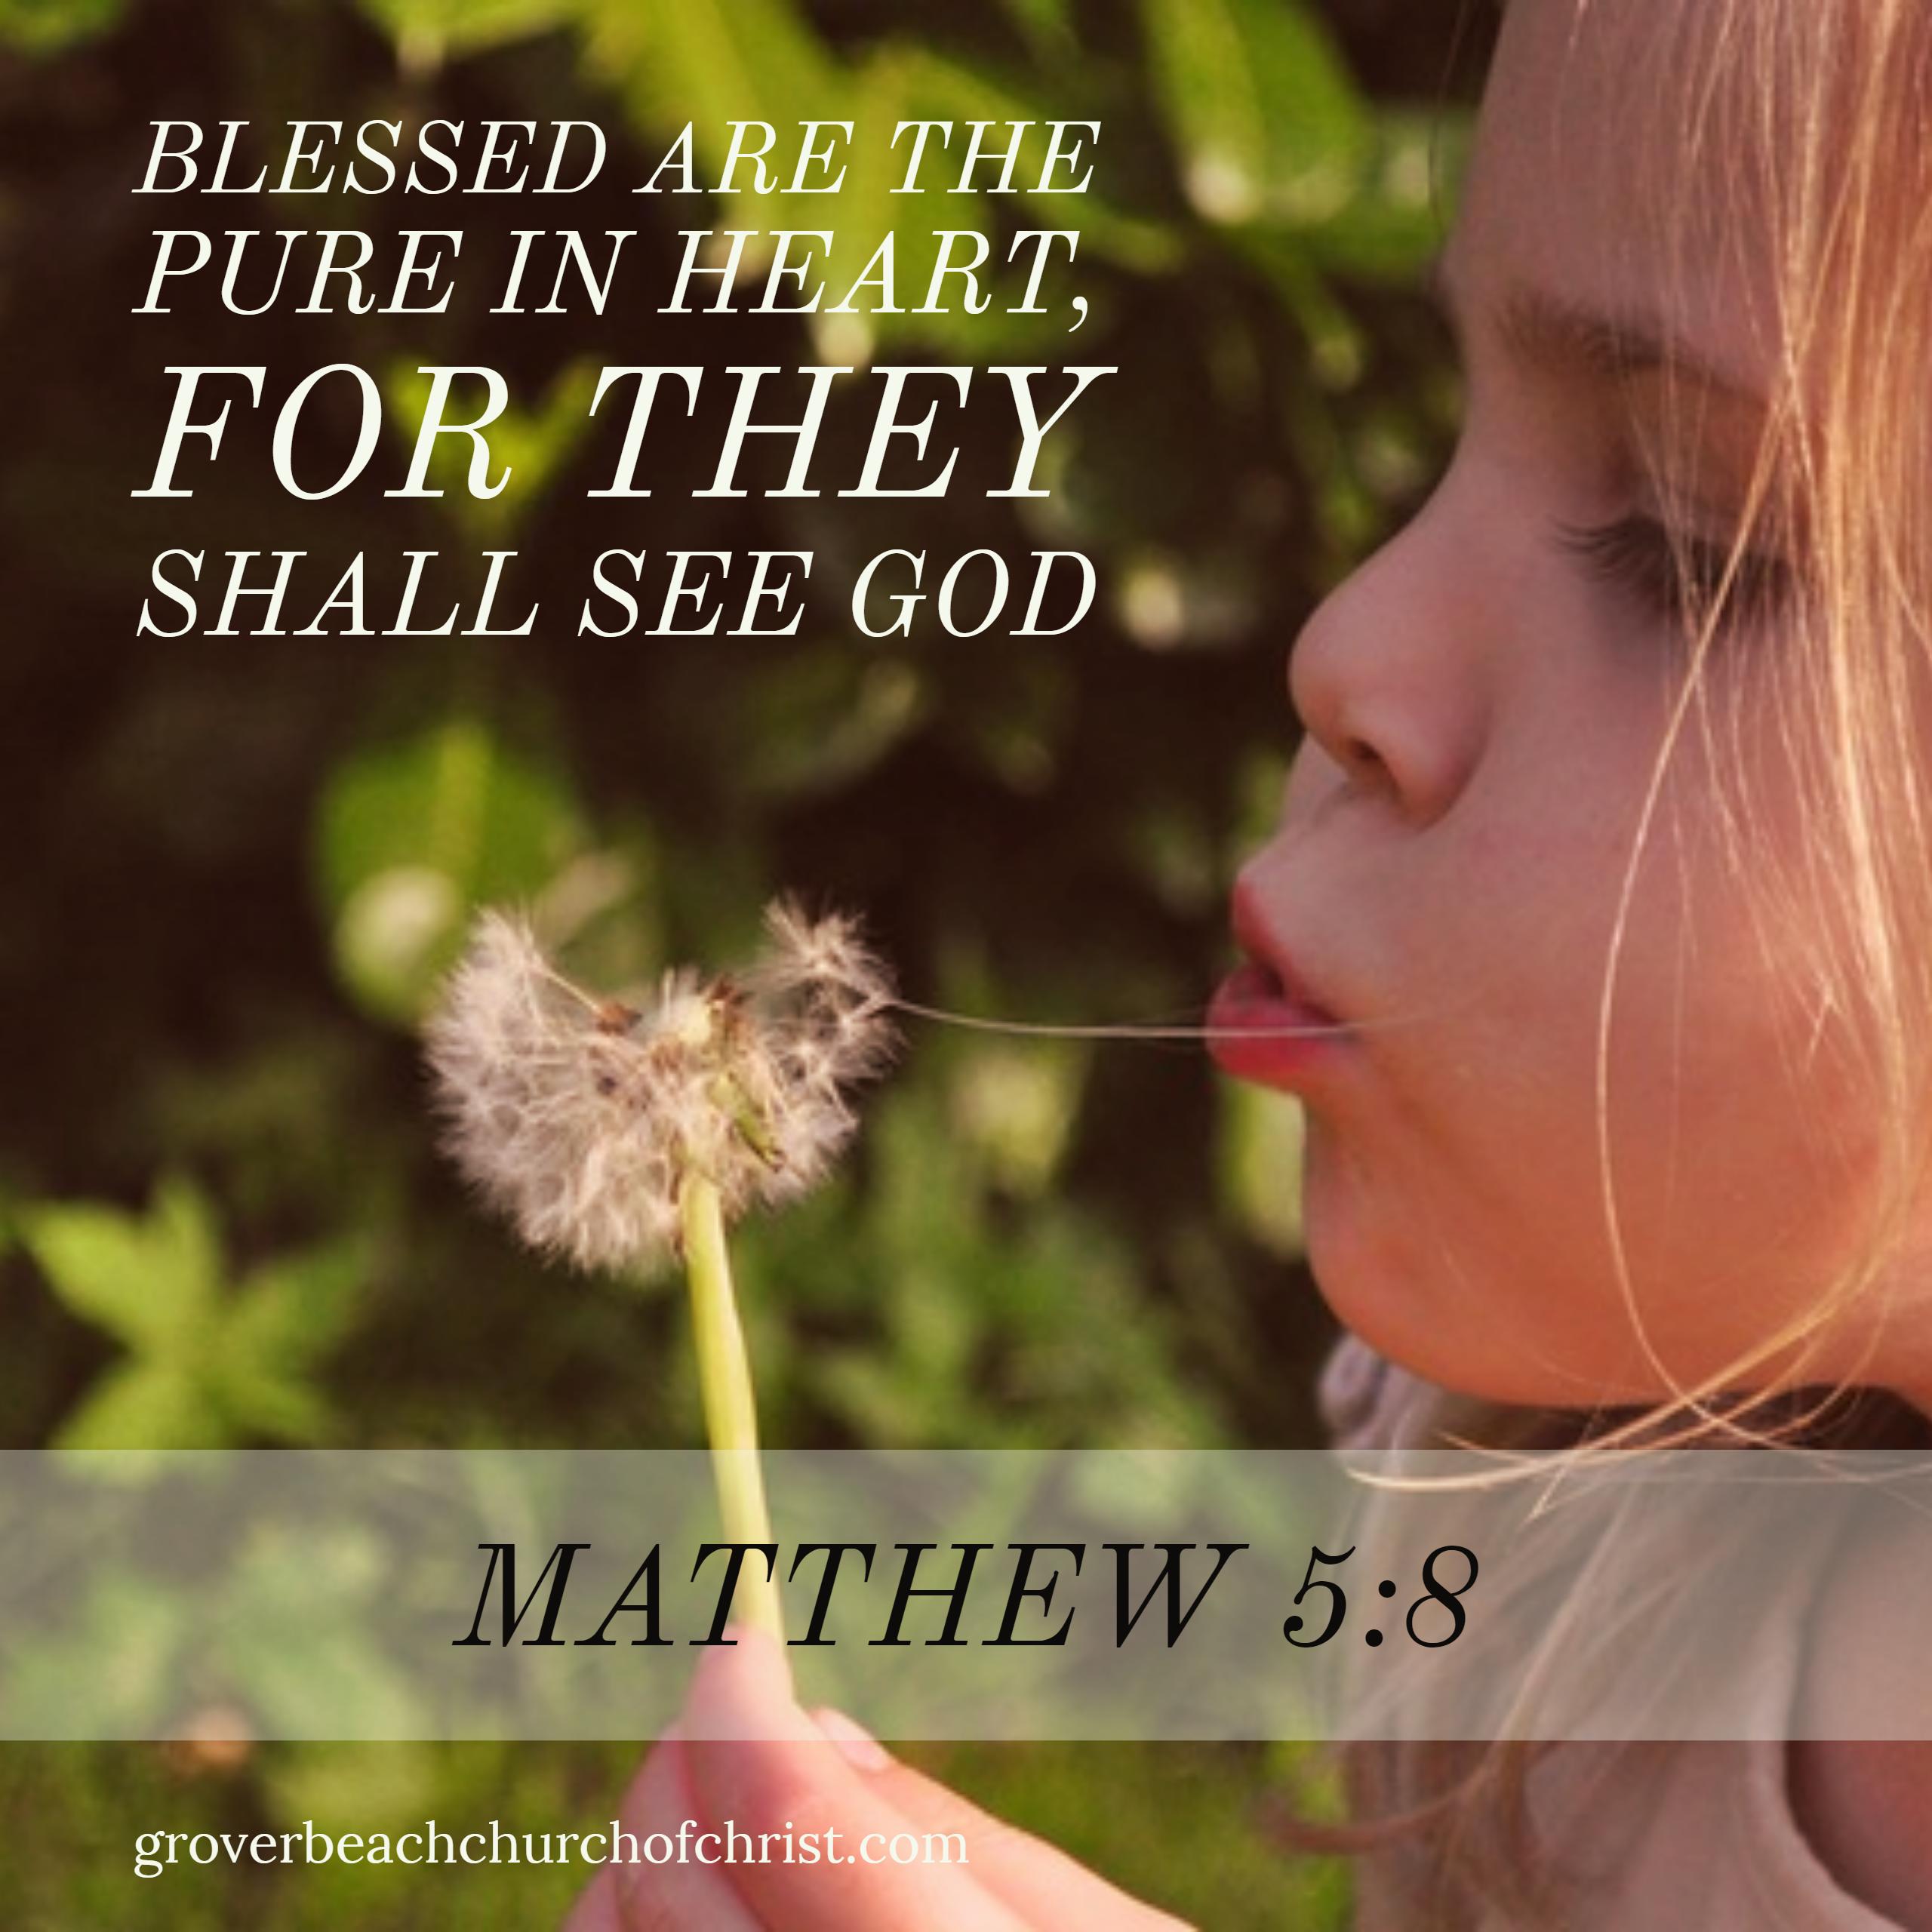 matthew-5:8-blessed-are-the-pure-in-heart